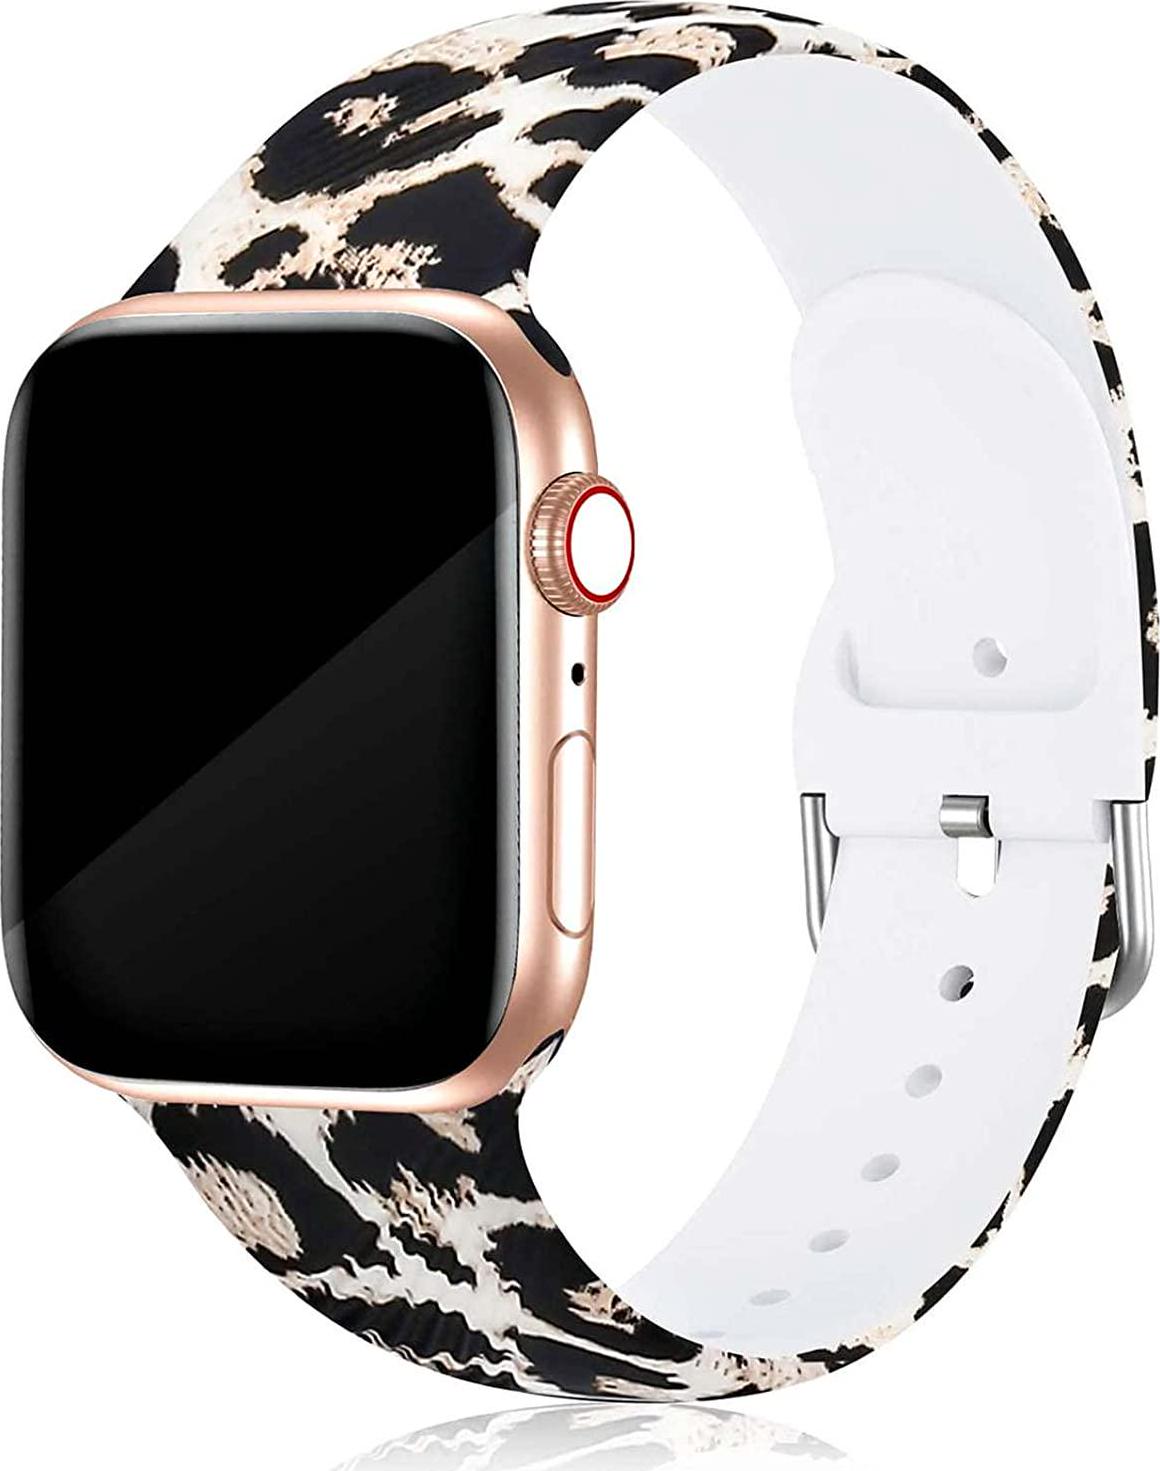 LODKA, LODKA Watch Band Compatible with Apple Watch Bands 38mm 40mm 41mm 42mm 44mm 45mm for Women Men, Premium Silicone Sport Floral Pattern Printed Fadeless Strap Band for Apple iWatch Series SE, 7 6 5 4 3 2 1